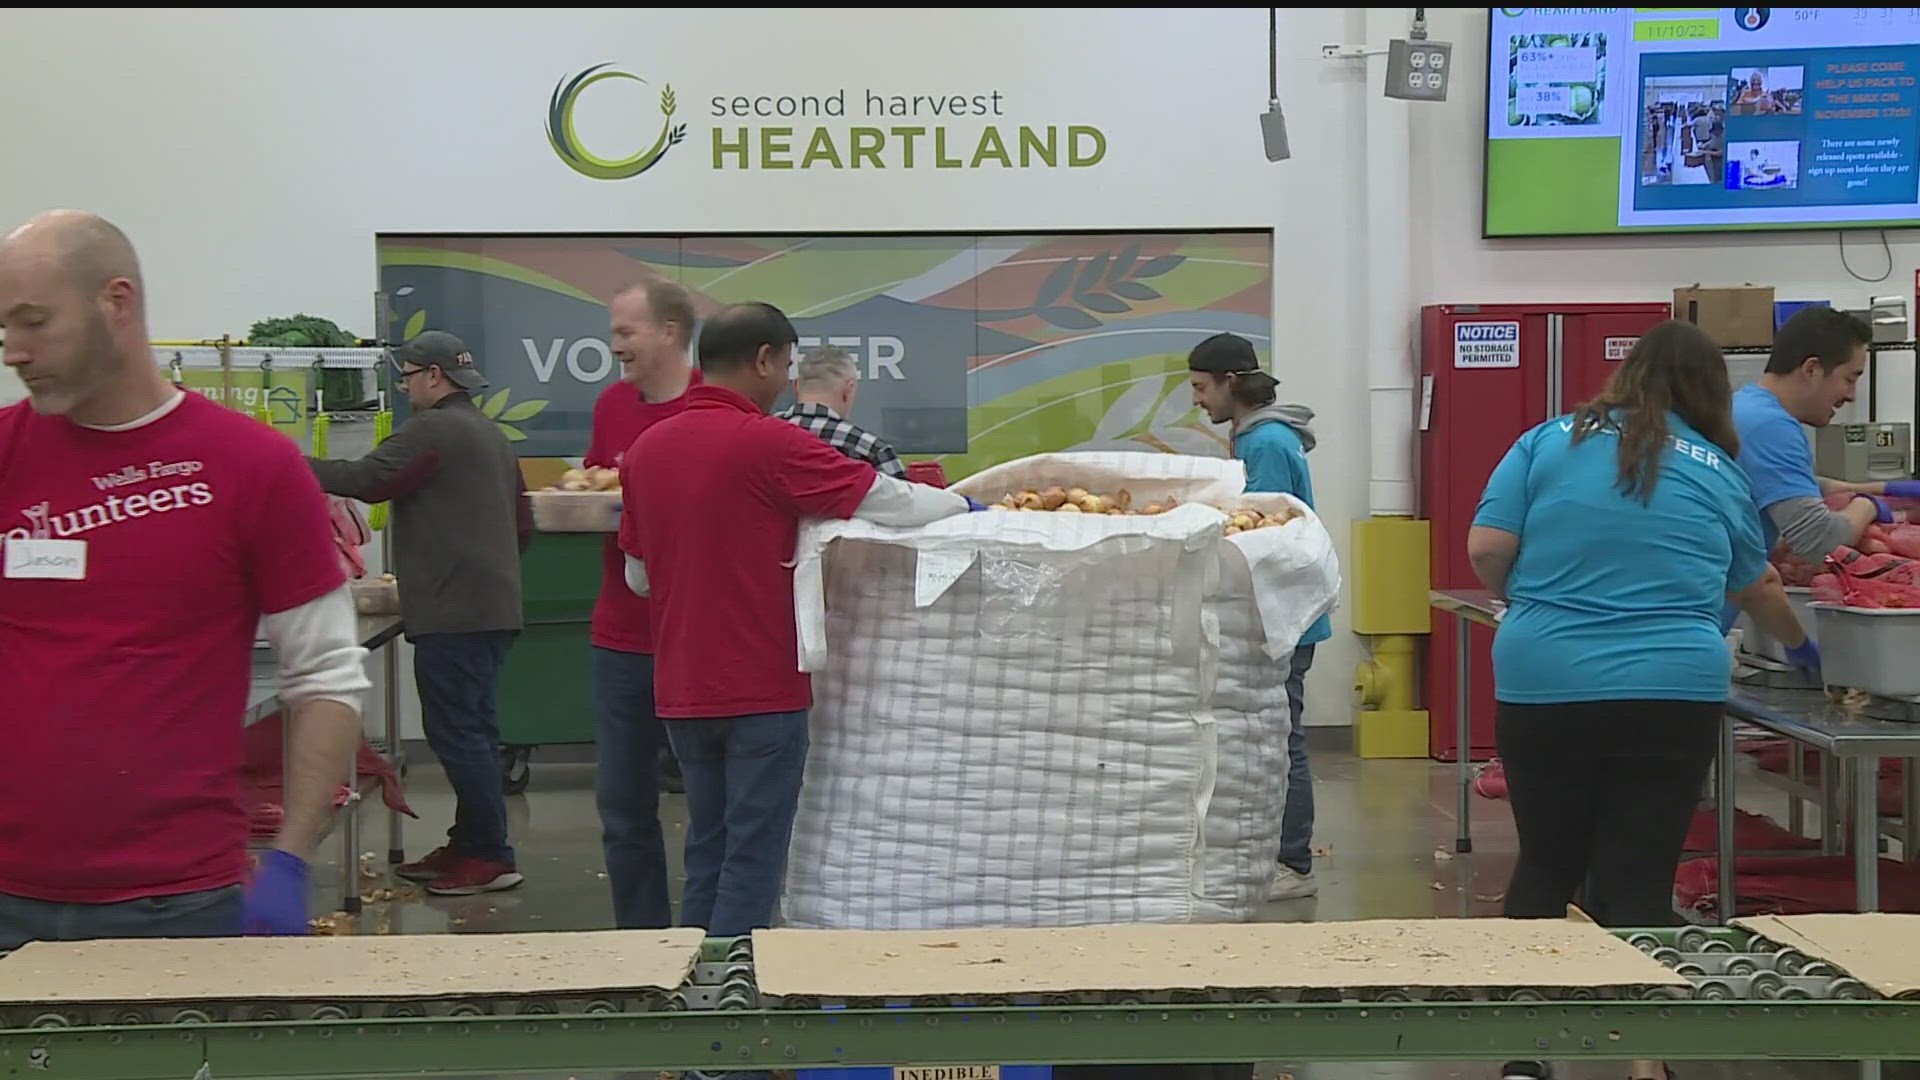 KARE 11 Sunrise & Second Harvest Heartland teamed up to raise over $80,000 for families facing food insecurity.